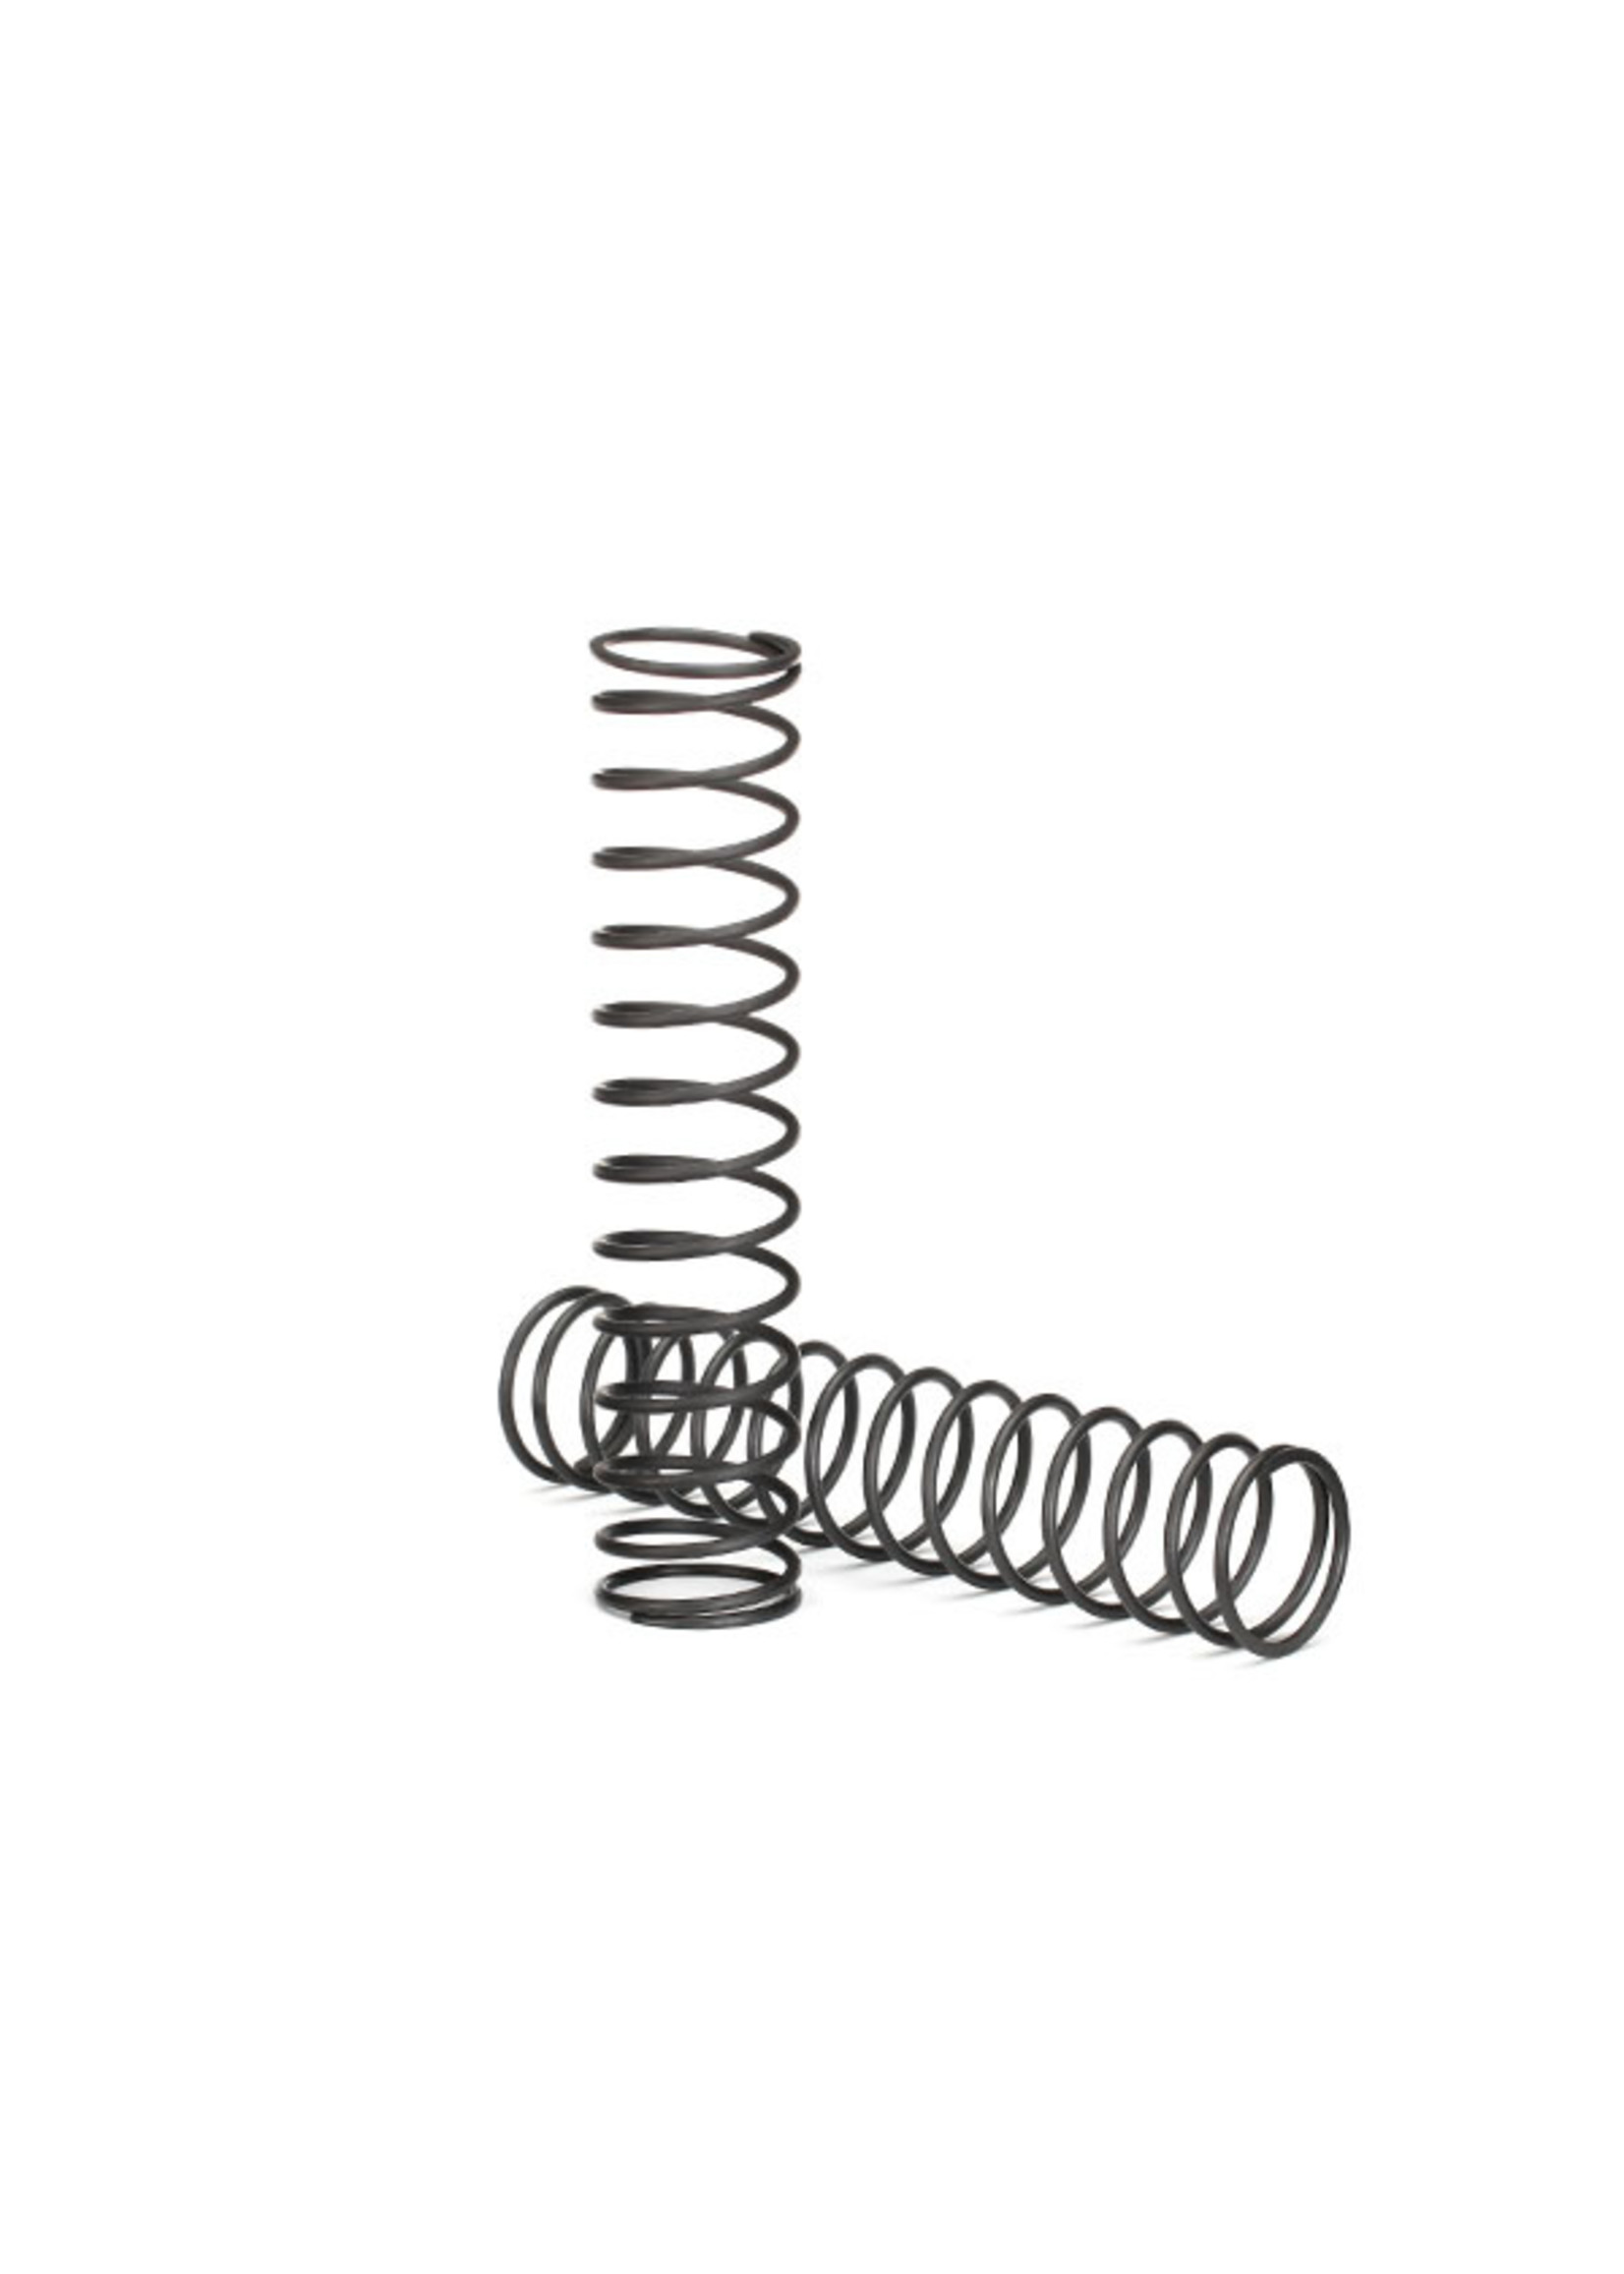 Traxxas 7766 - Springs, GTX Shock, 1.055 Rate - Natural Finish